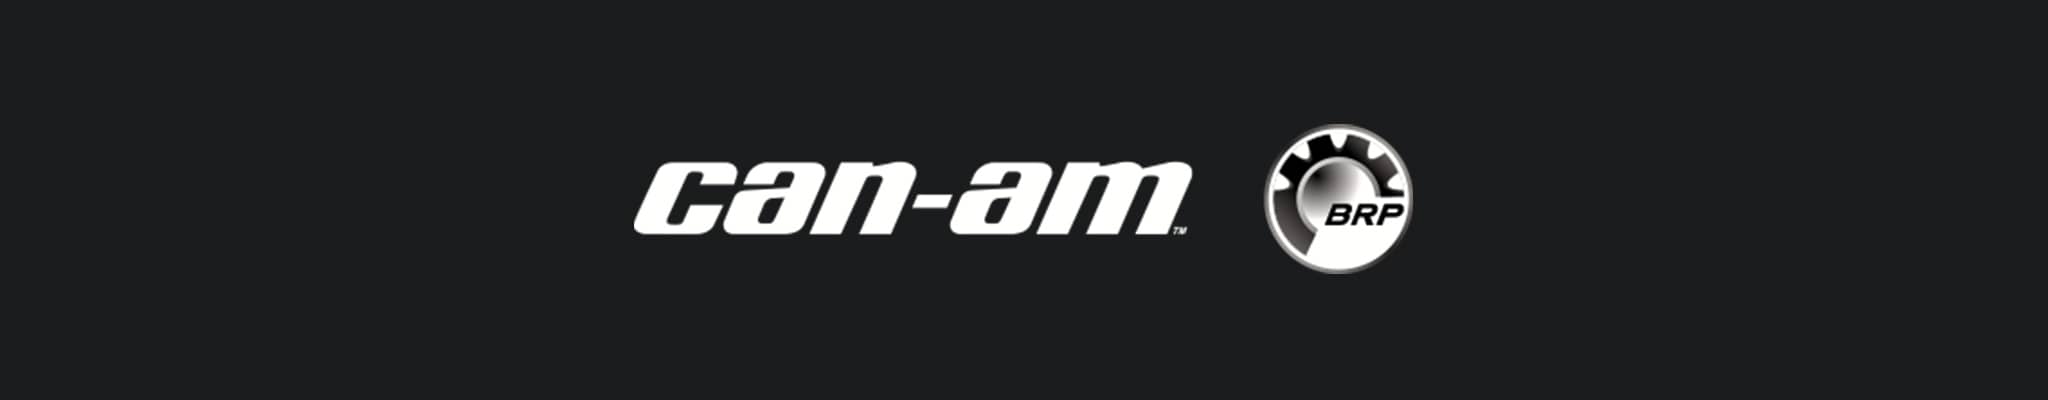 The CAN-AM logo in white on a black background, featured alongside the text on the Perfex website.